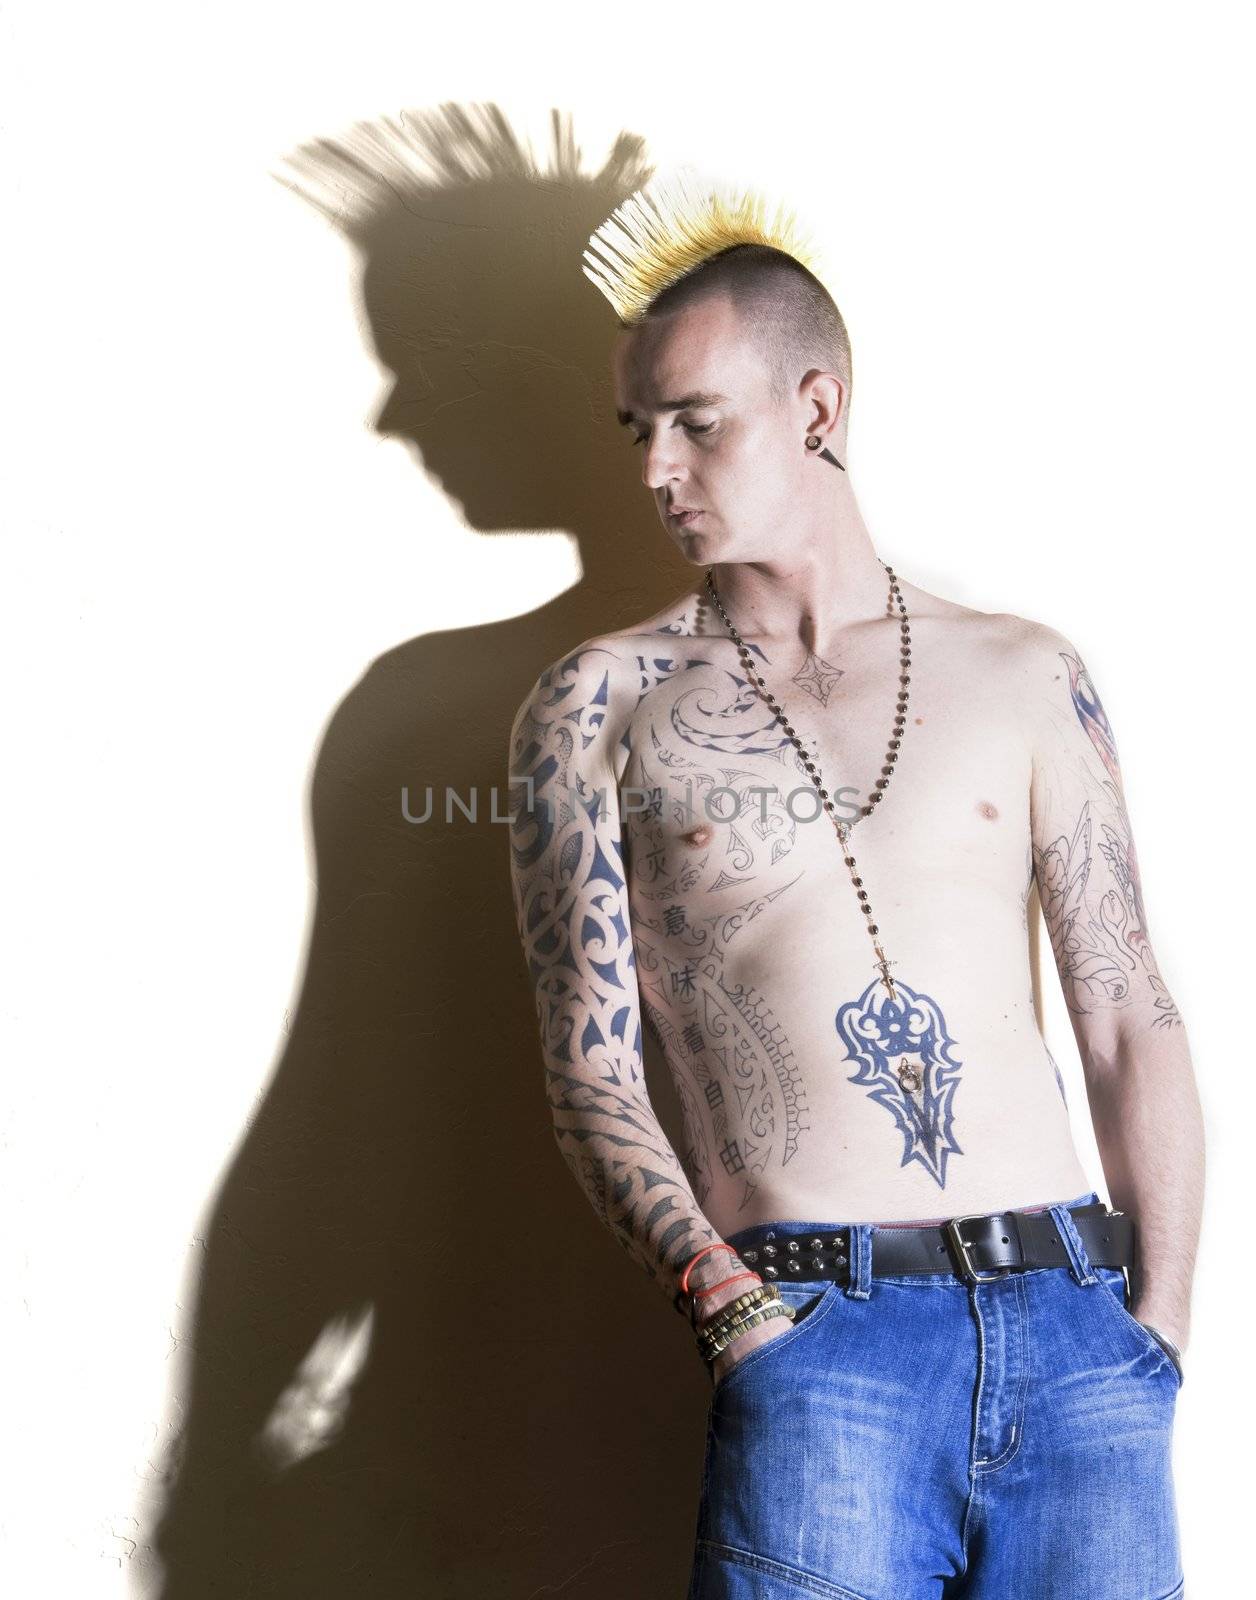 Punk with tattoos leaning against a white wall